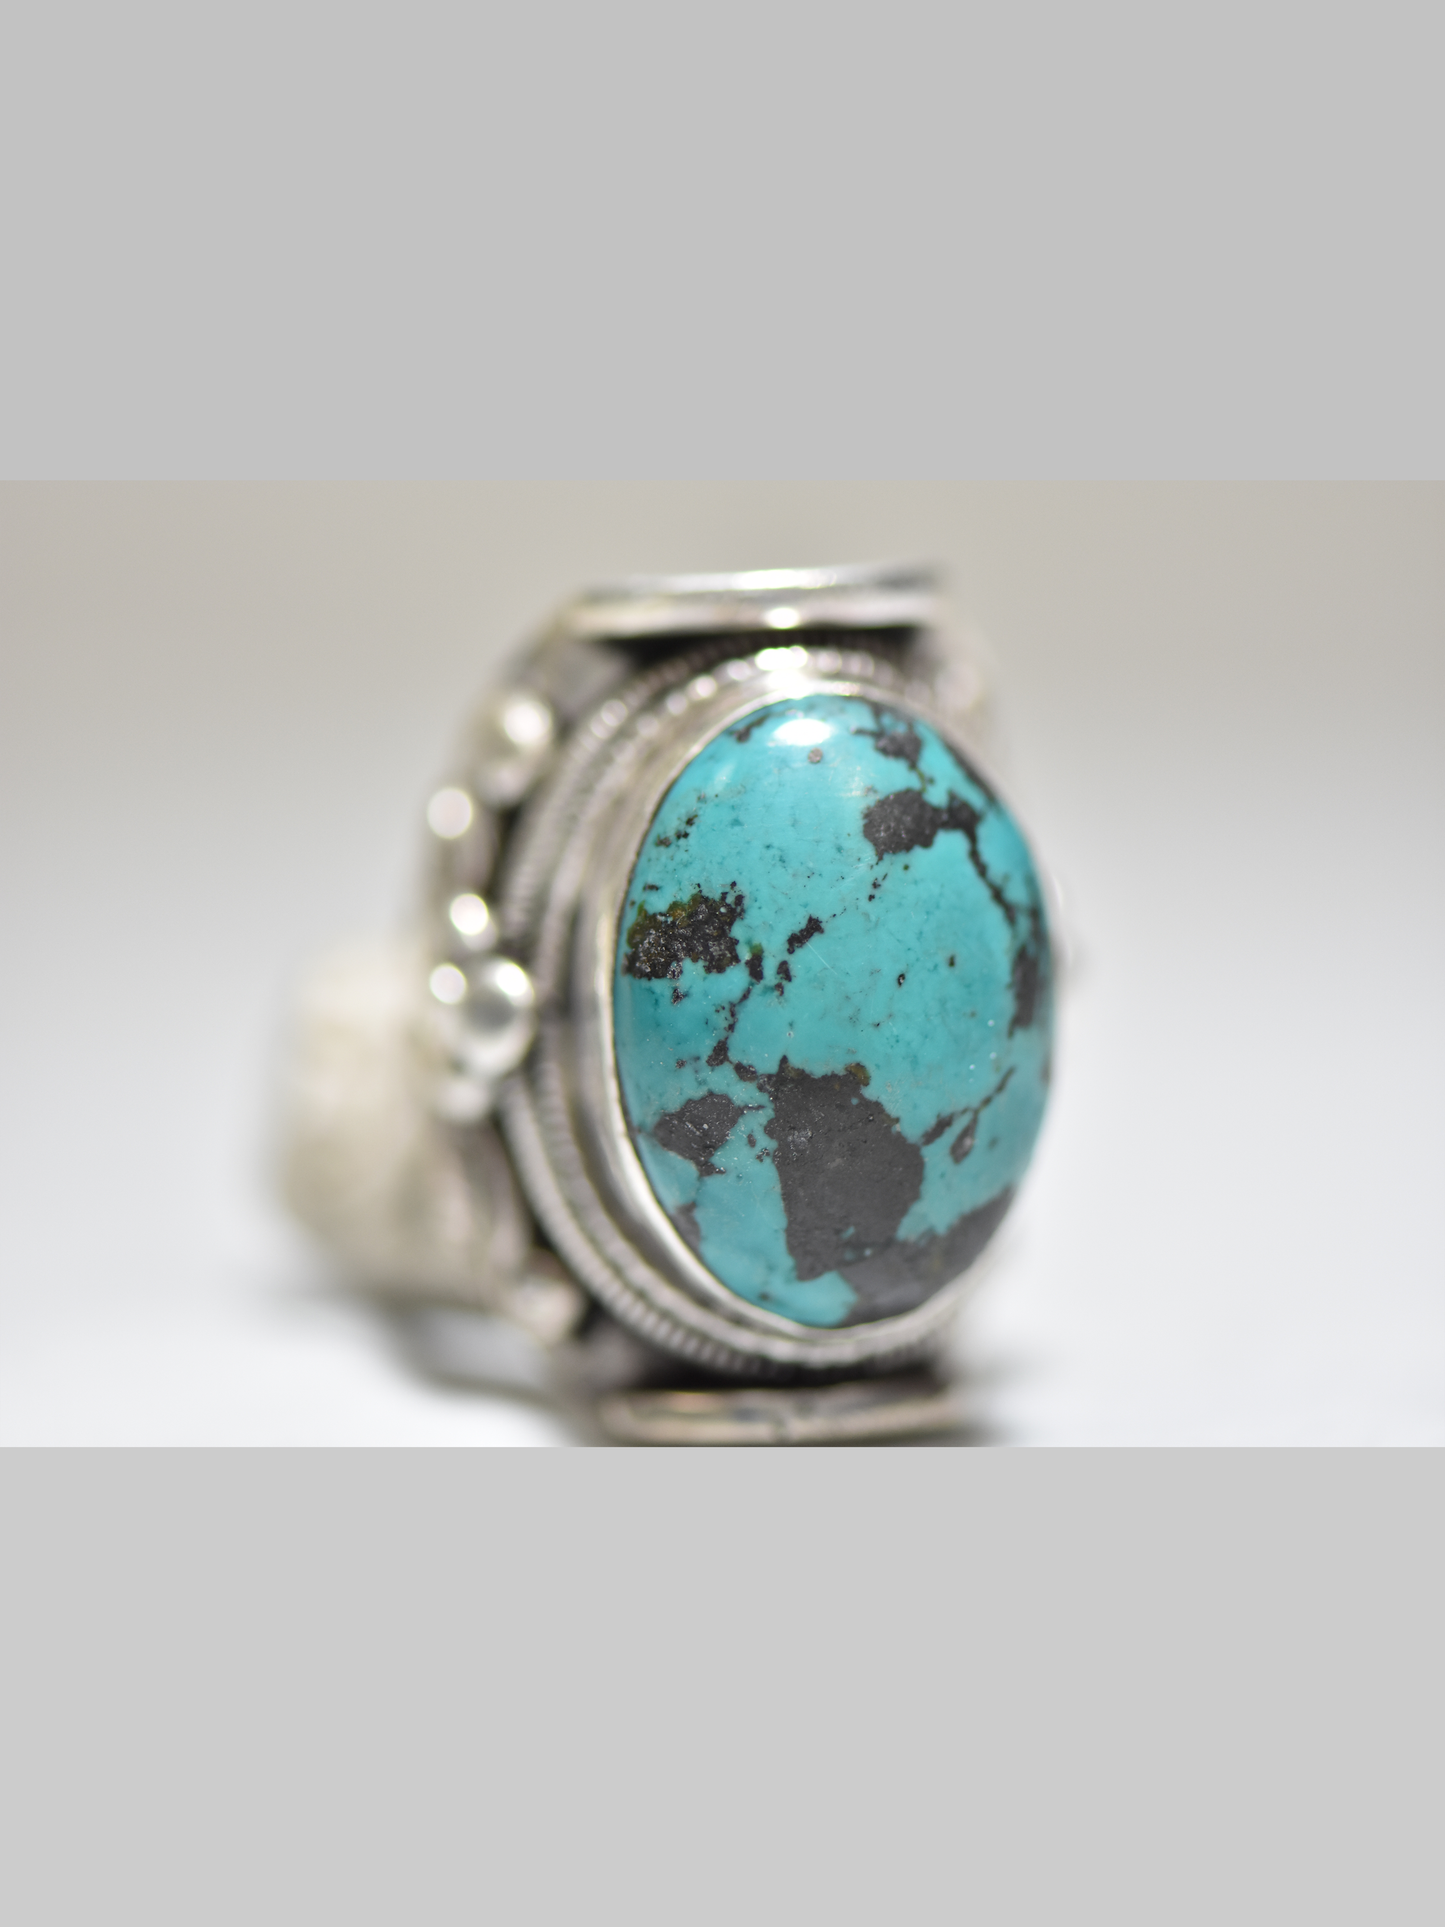 Turquoise ring  knuckle cigar band sterling silver women  men  Size  8.75